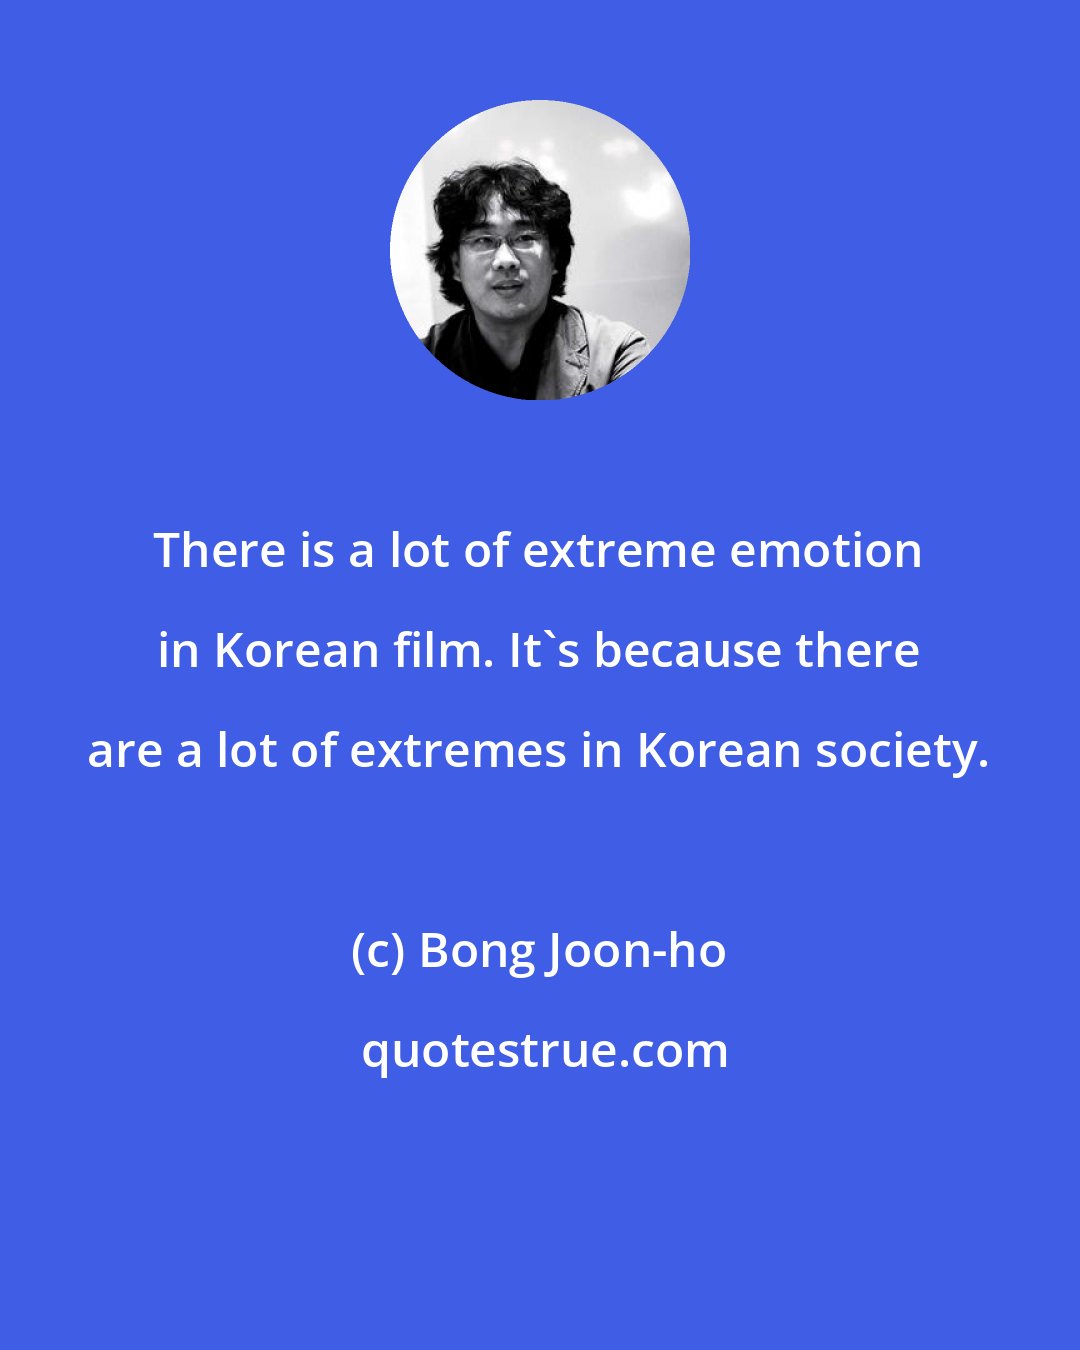 Bong Joon-ho: There is a lot of extreme emotion in Korean film. It's because there are a lot of extremes in Korean society.